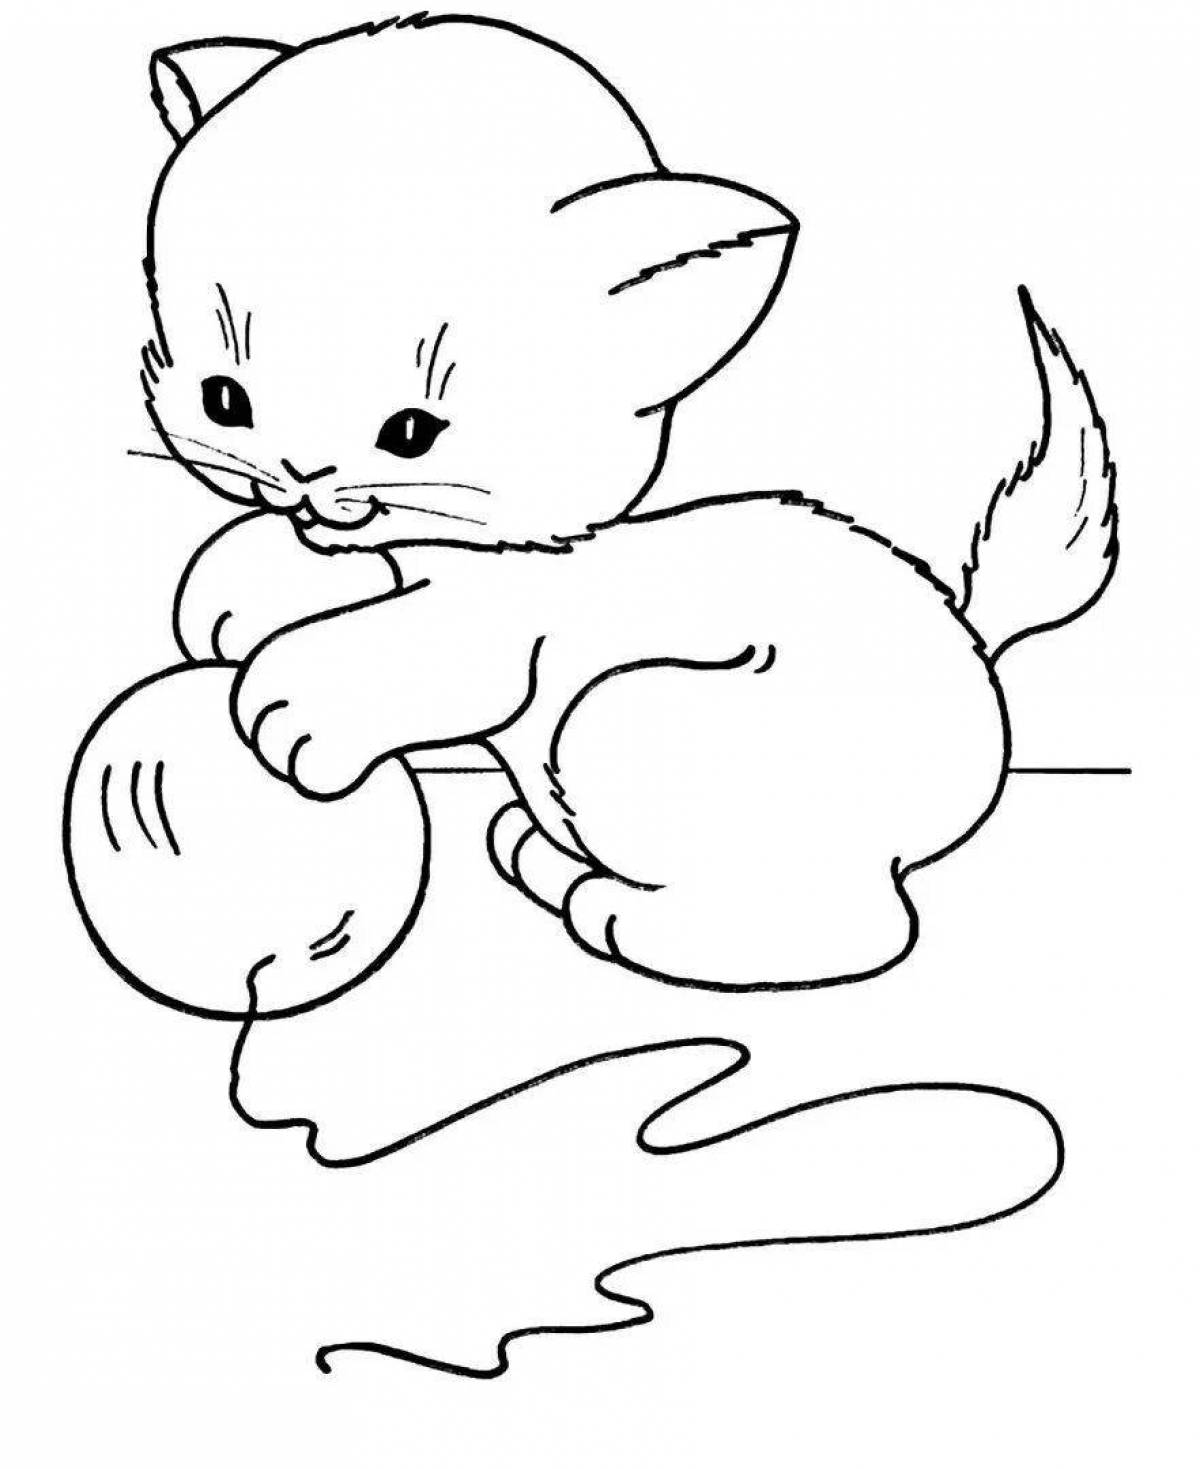 Coloring page wild cat with a ball